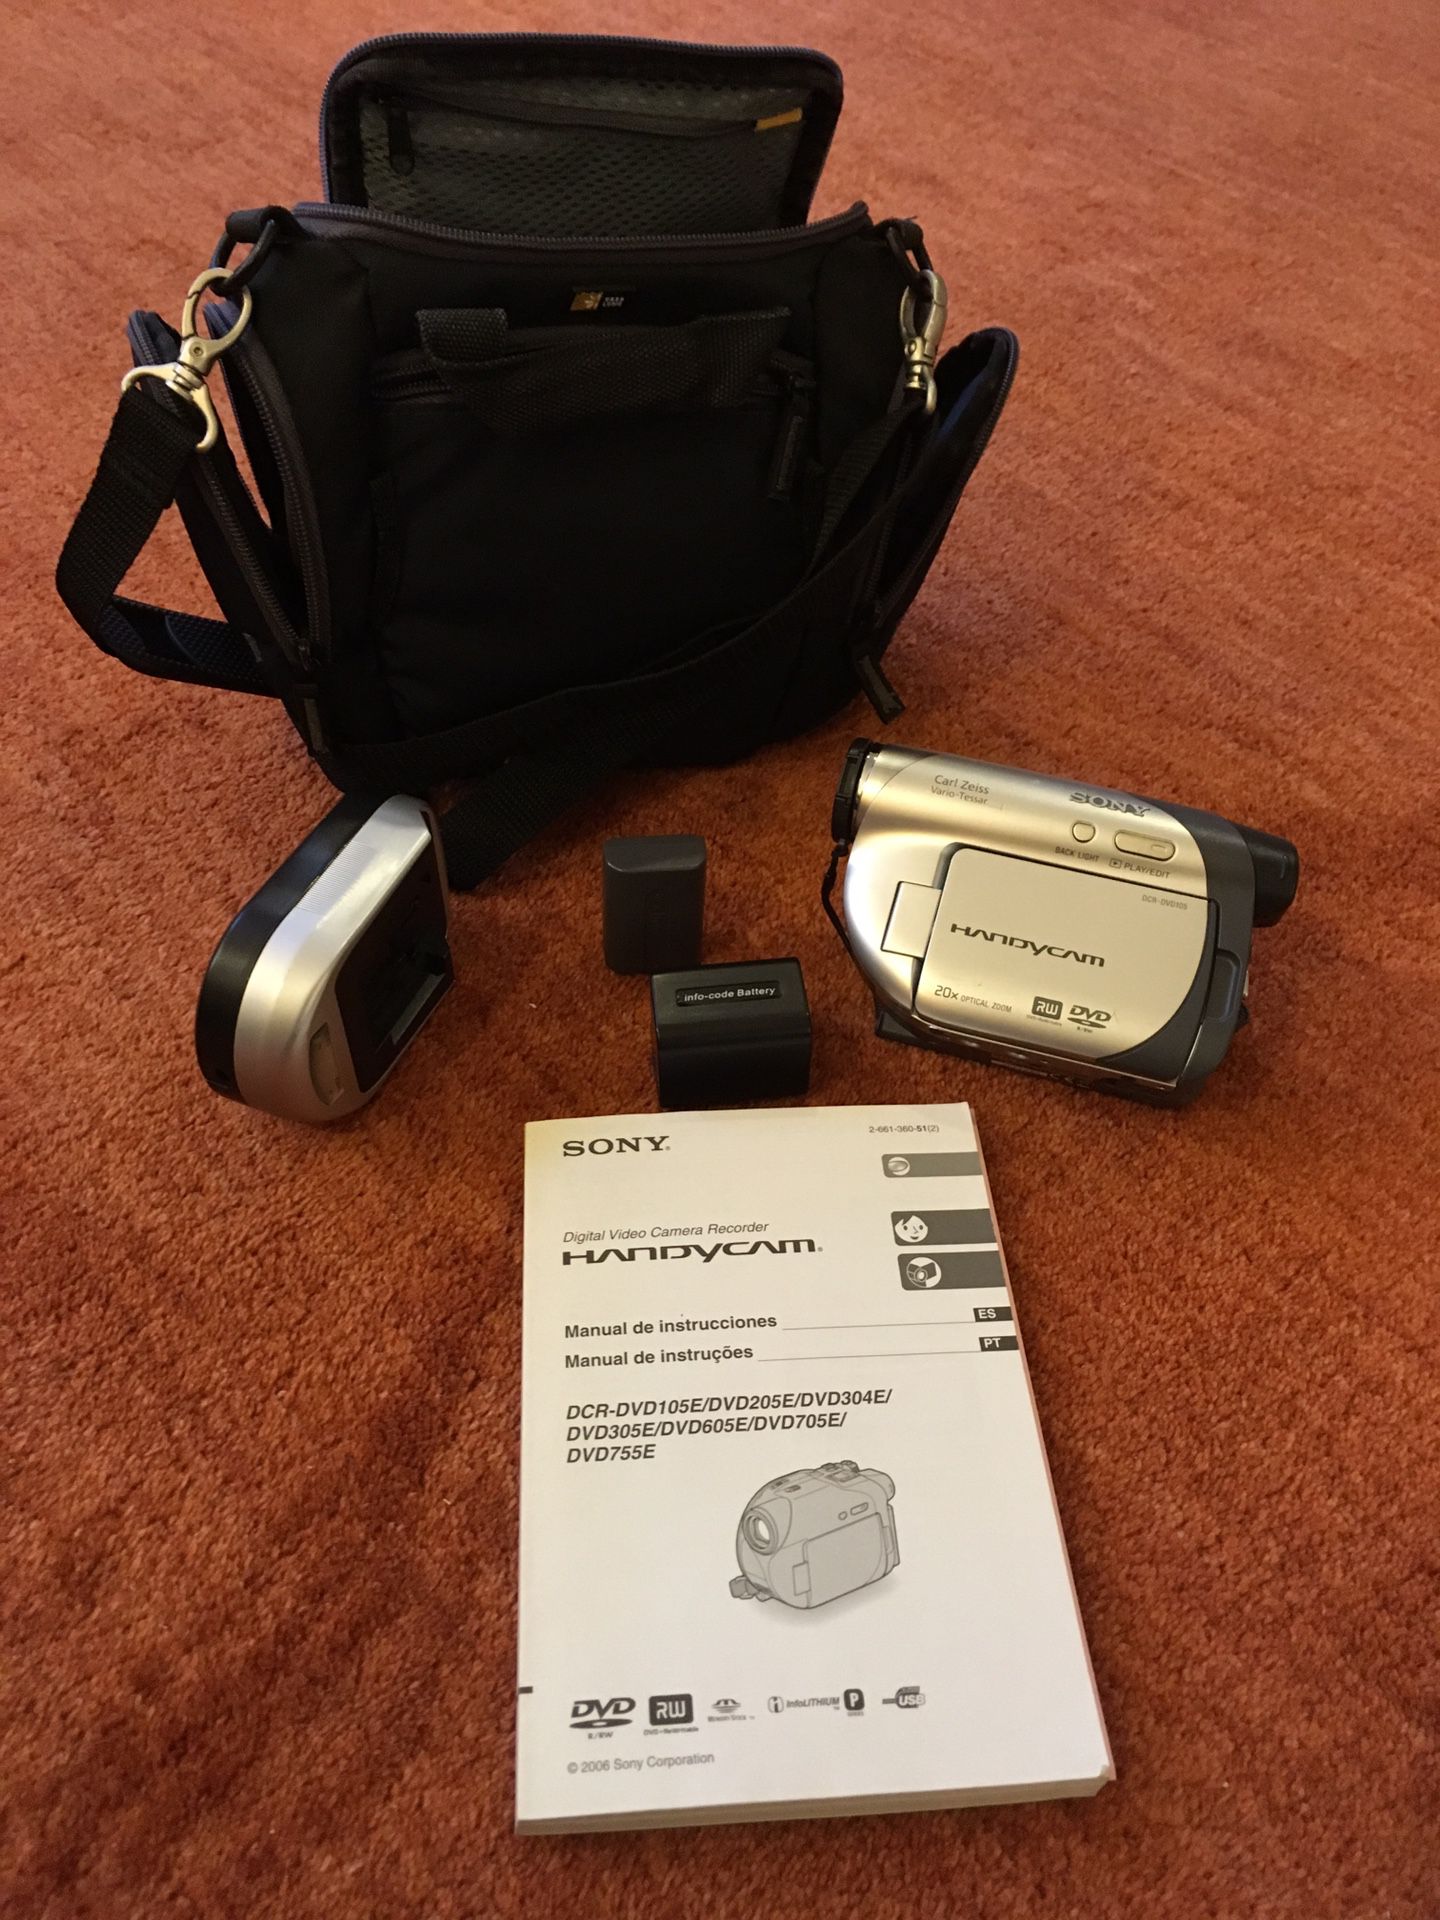 SONY HANDYCAM DCR-DVD305 CAMCORDER with 2 batteries, charger and bag